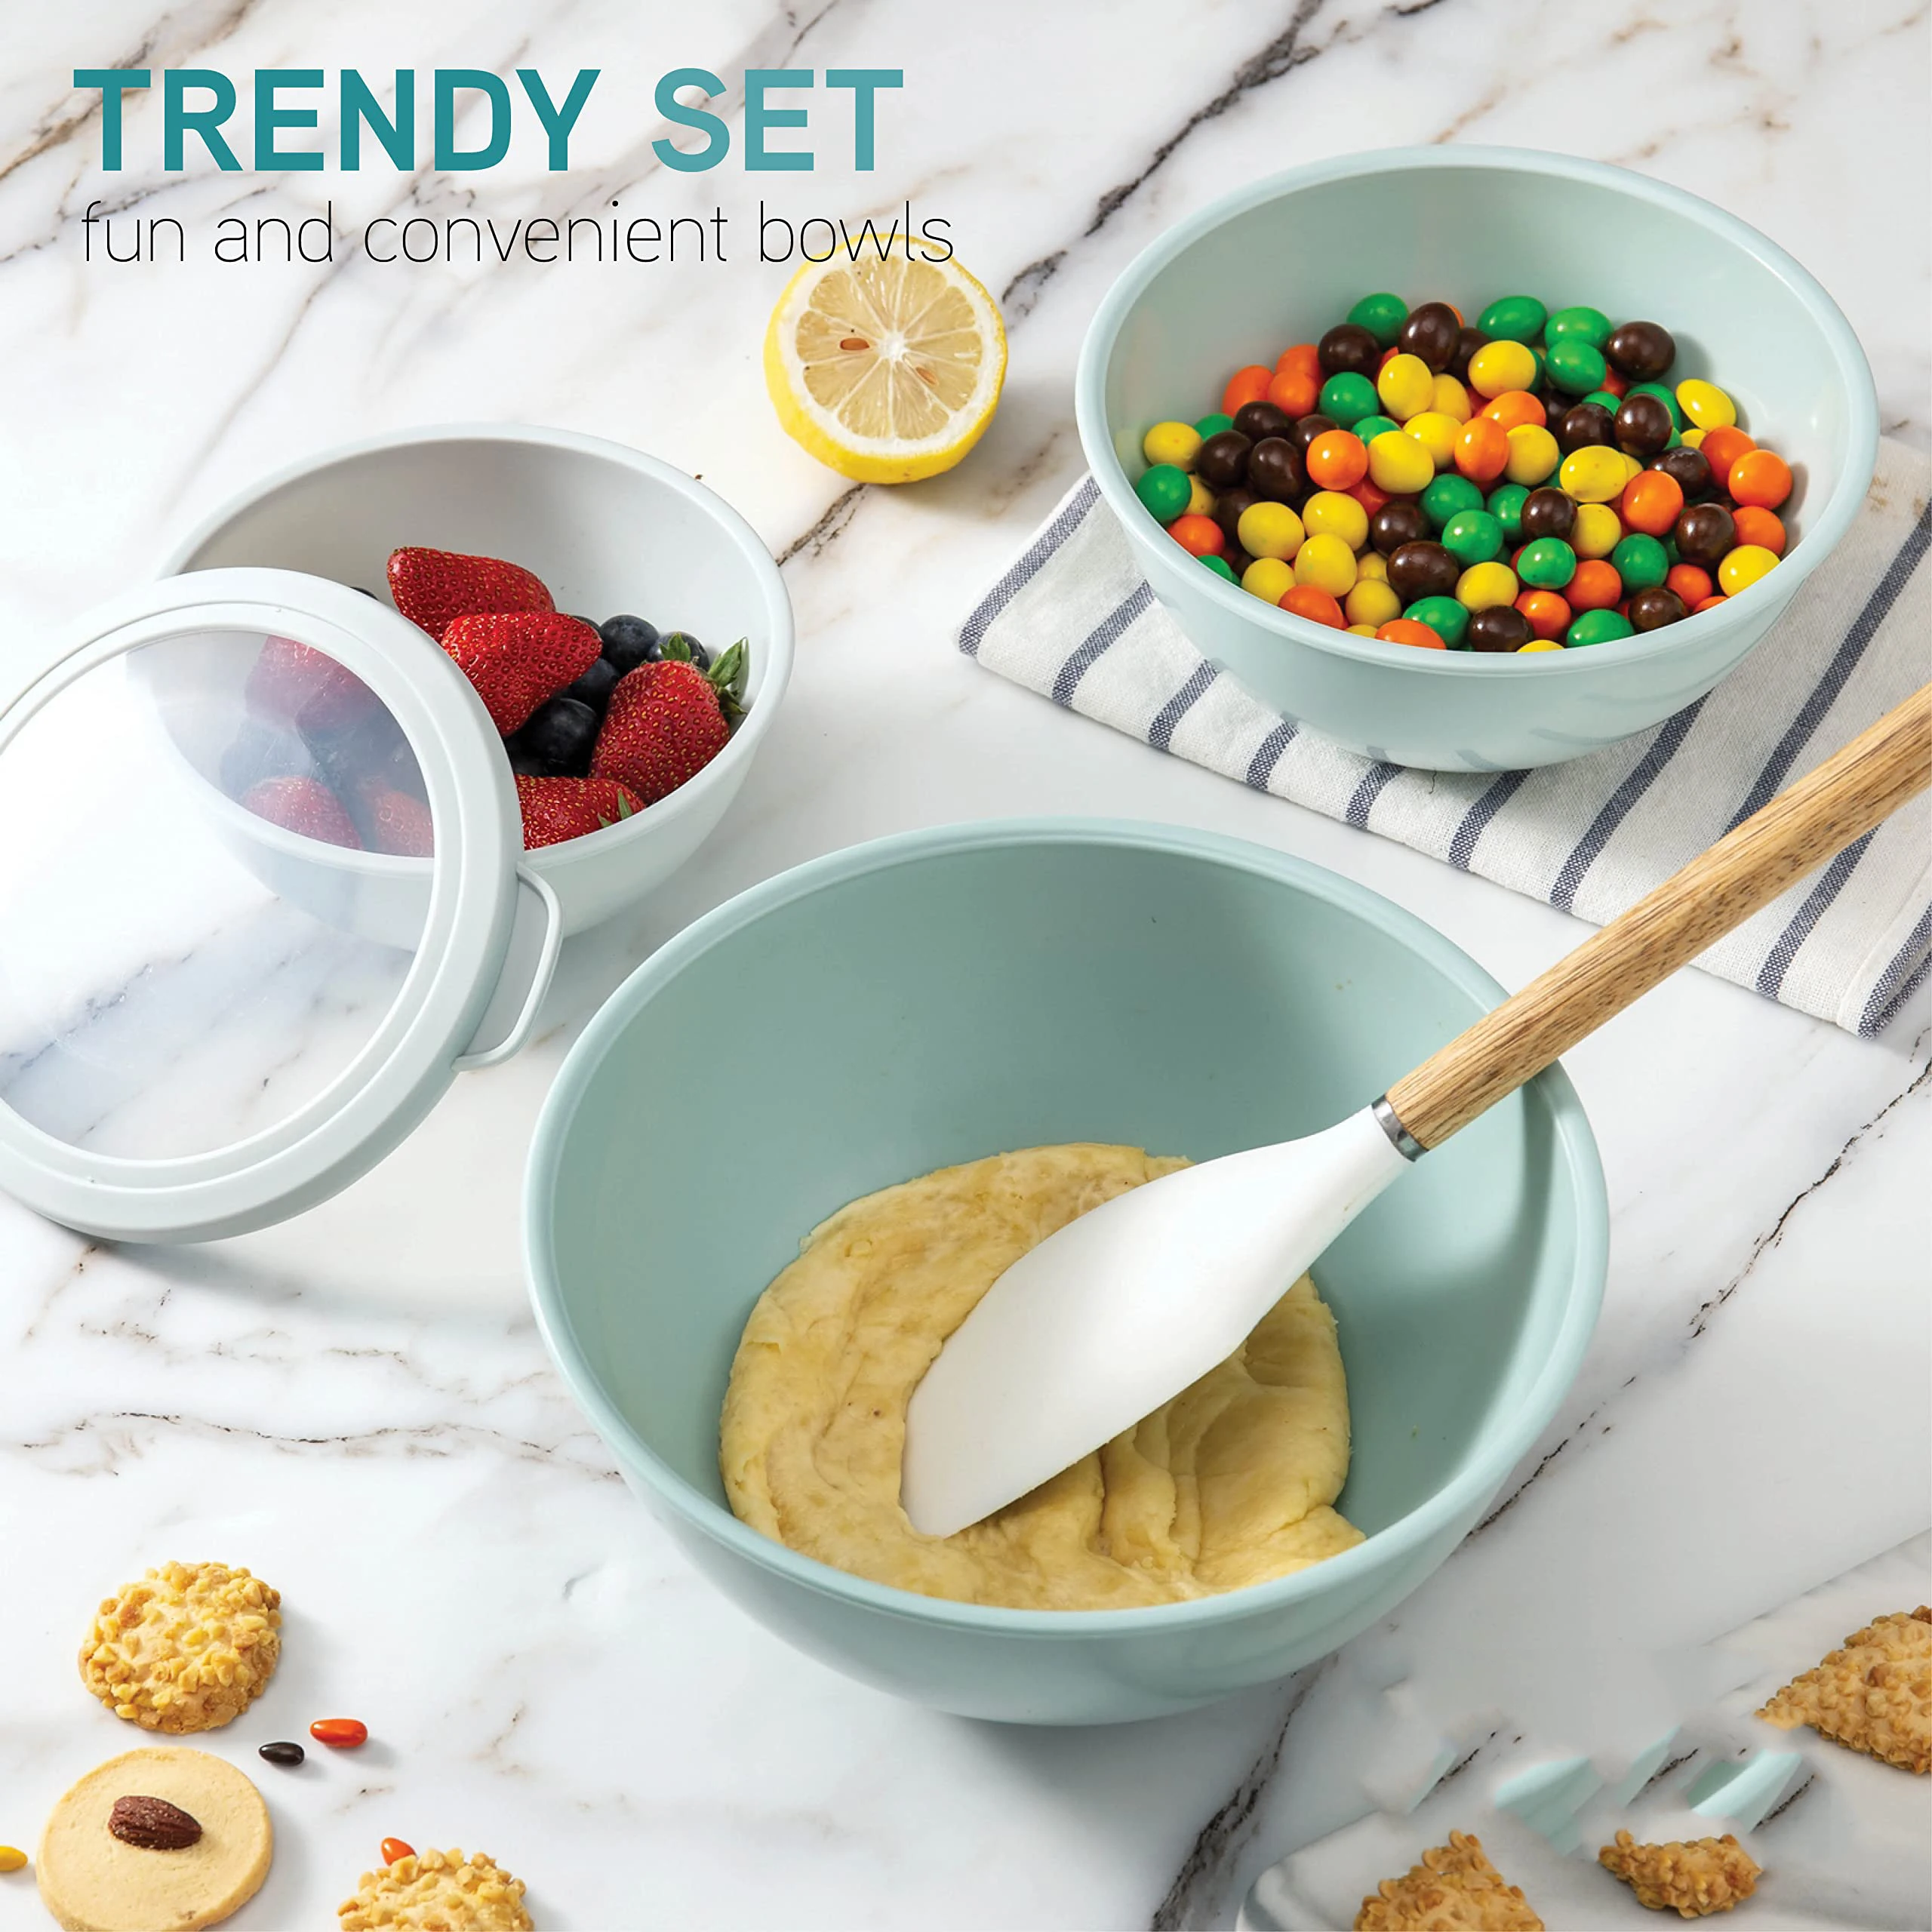 Mixing Bowls with TPR Lids - 12 Piece Plastic Nesting Bowls Set includes 6 Prep Bowls and 6 Lids Microwave Safe